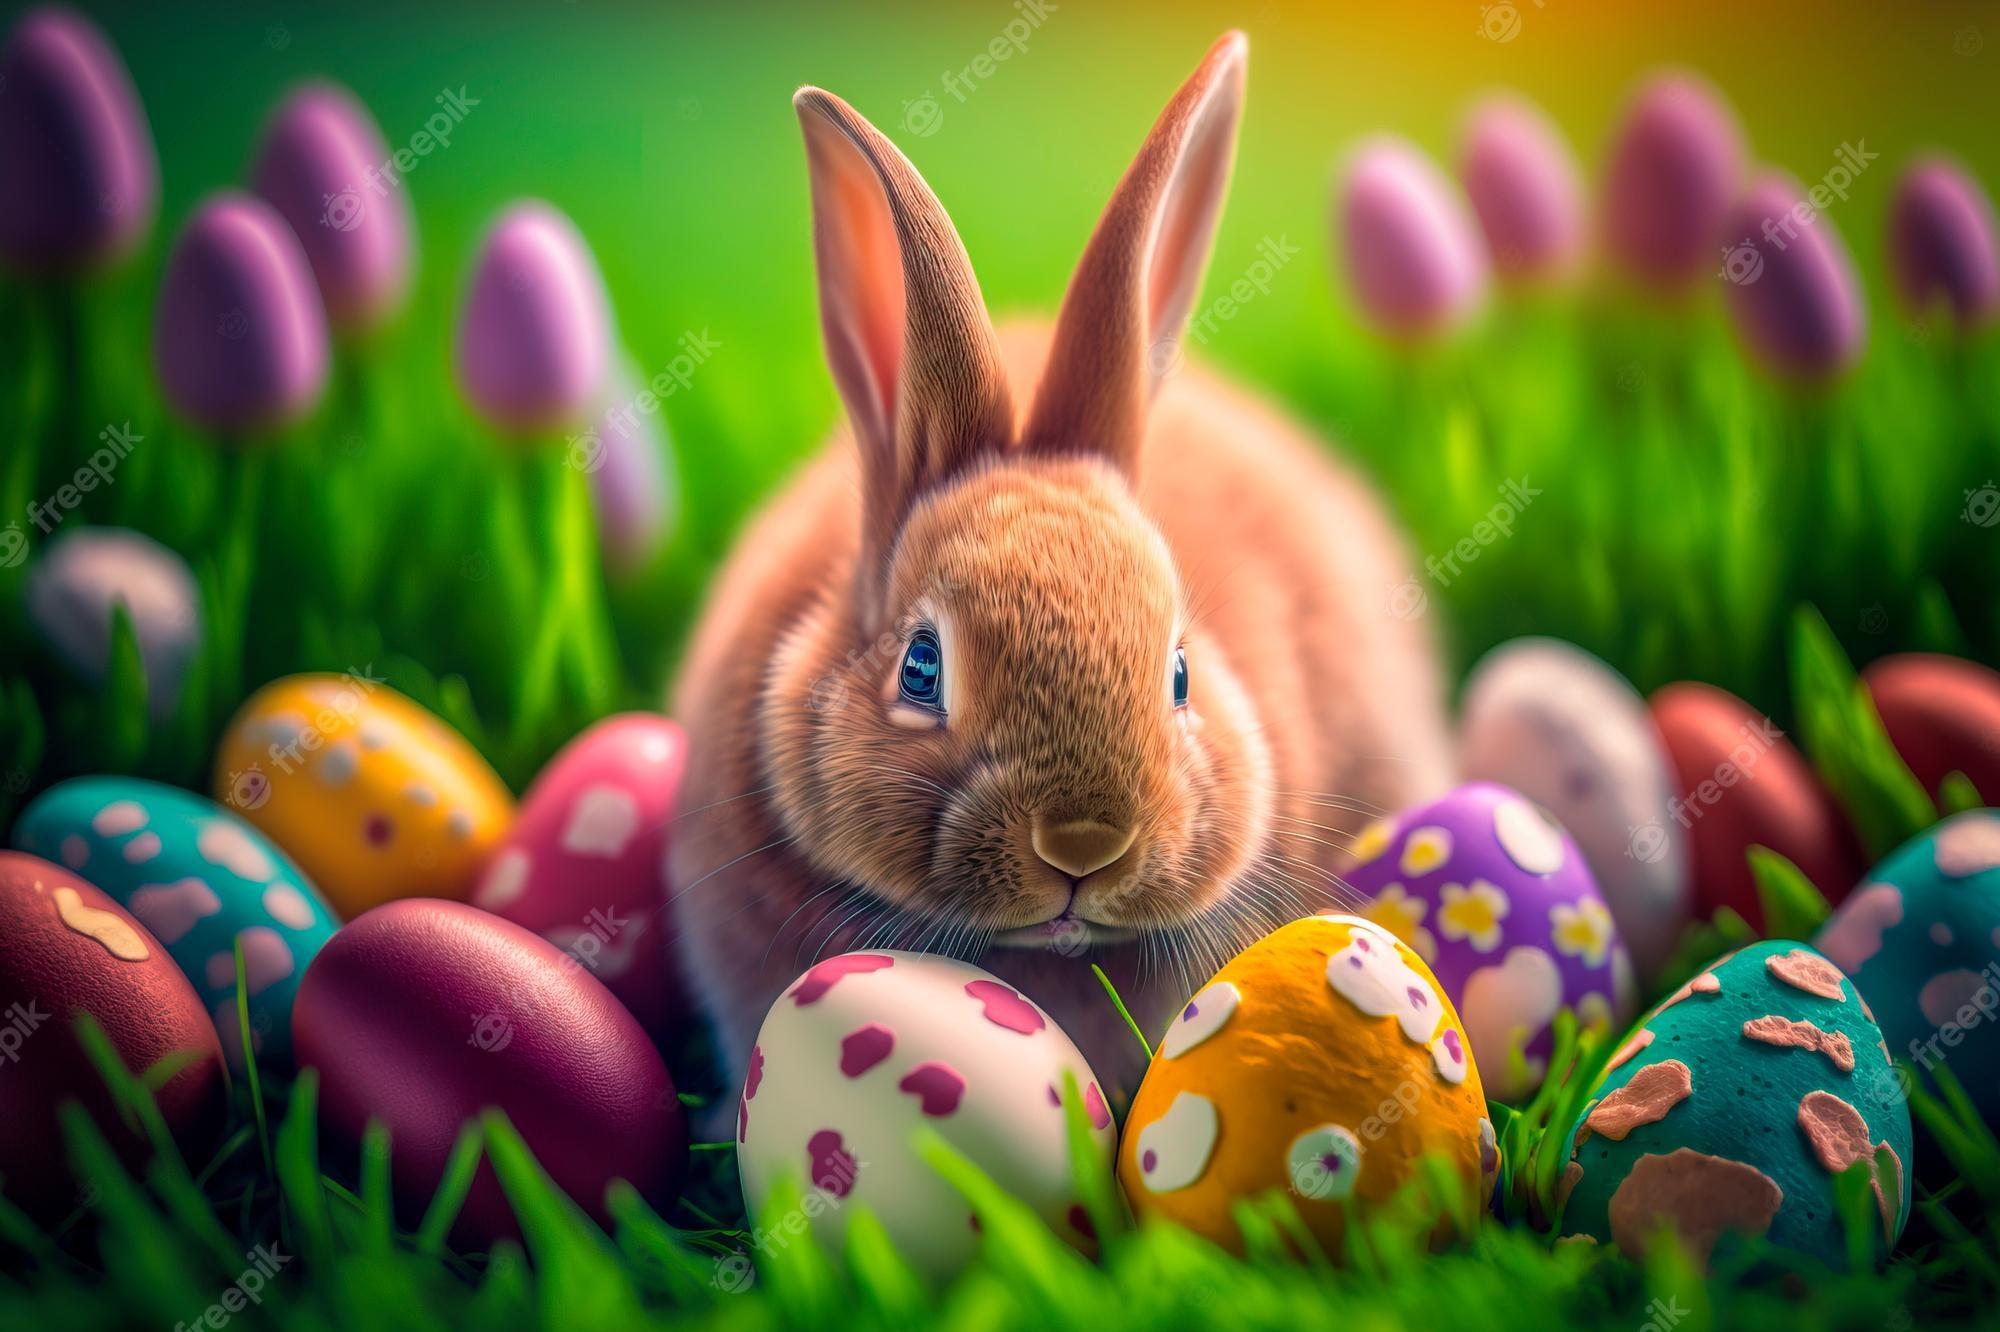 Premium Photo Rabbit And Easter Eggs In Green Grass Cute